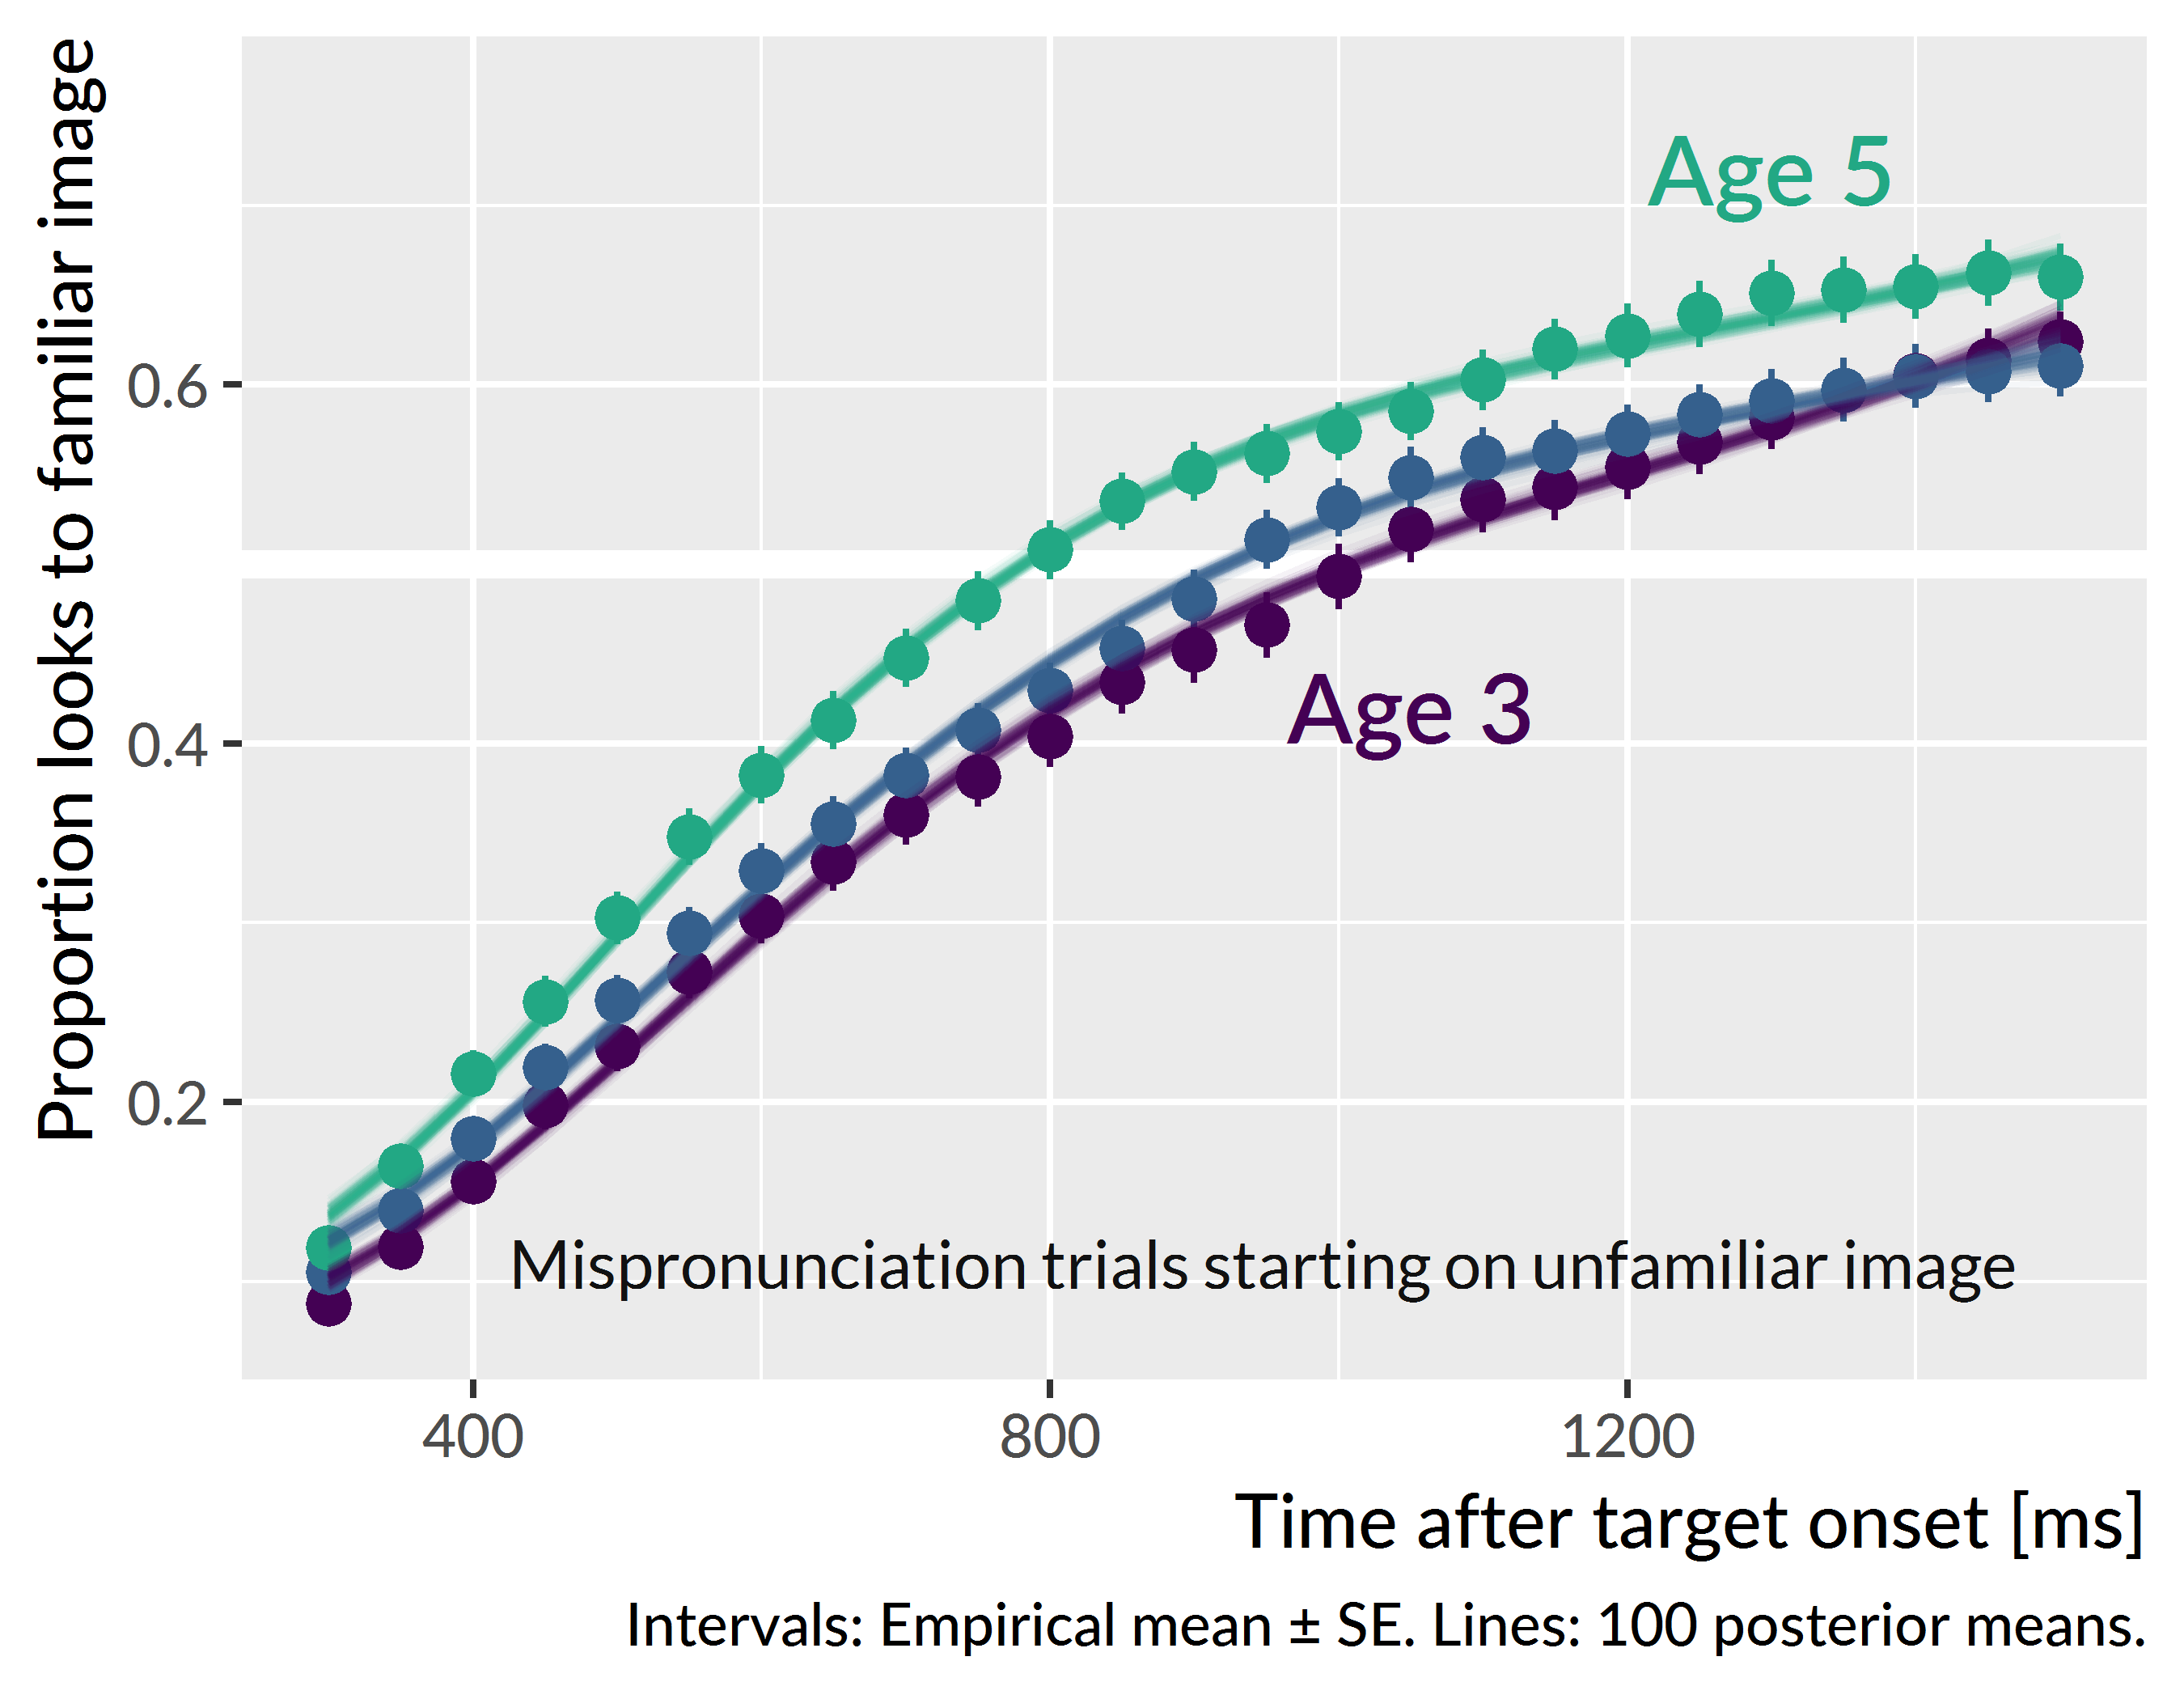 Average looks to the familiar image for mispronunciation trials starting on the unfamiliar image at each age. Lines represent 100 posterior predictions of the group average (the average of participants’ individually predicted growth curves).